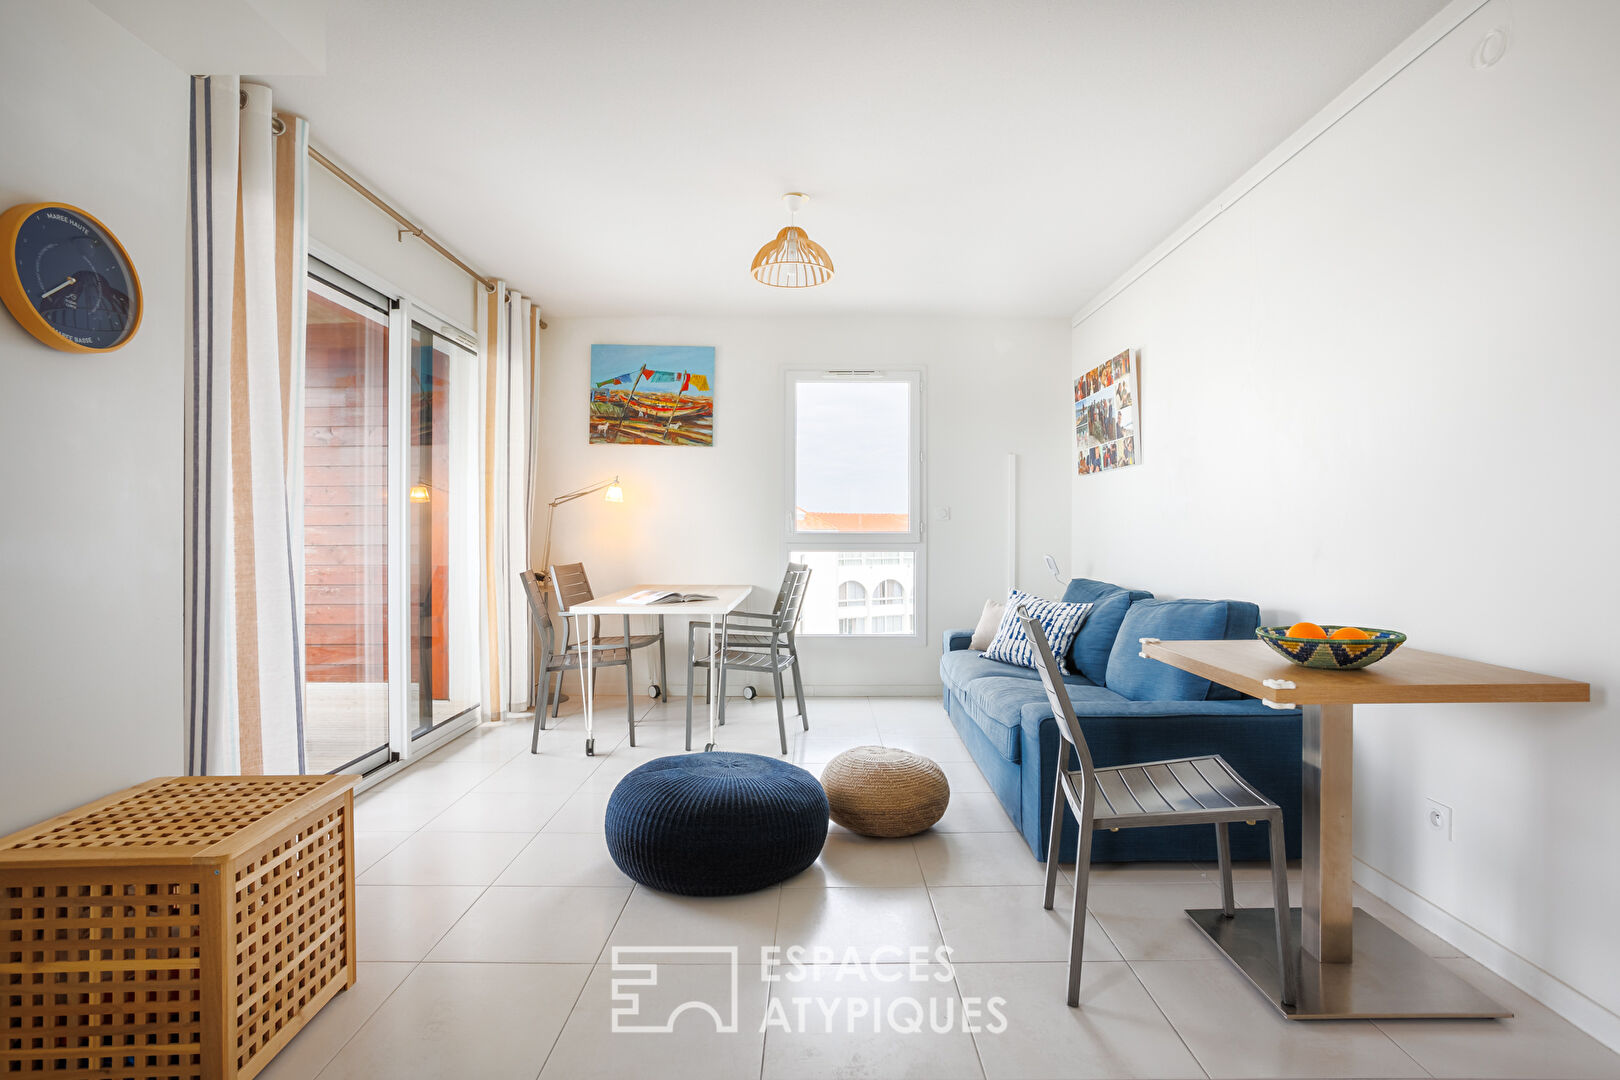 Apartment in the heart of Les Minimes, sea view balcony